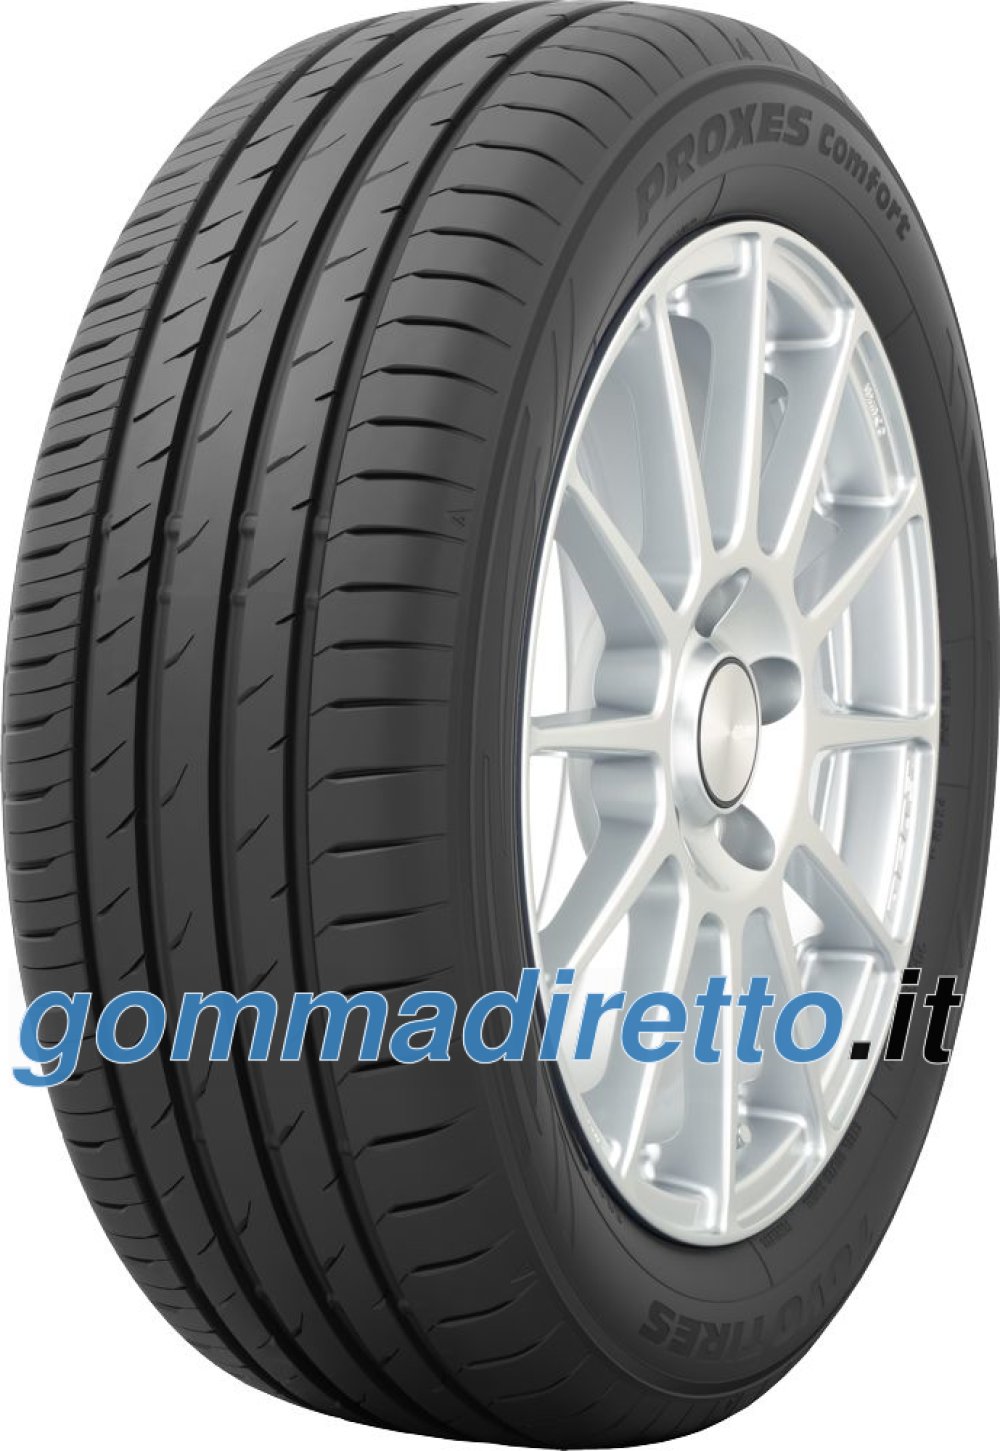 Image of Toyo Proxes Comfort ( 205/55 R19 97V XL )